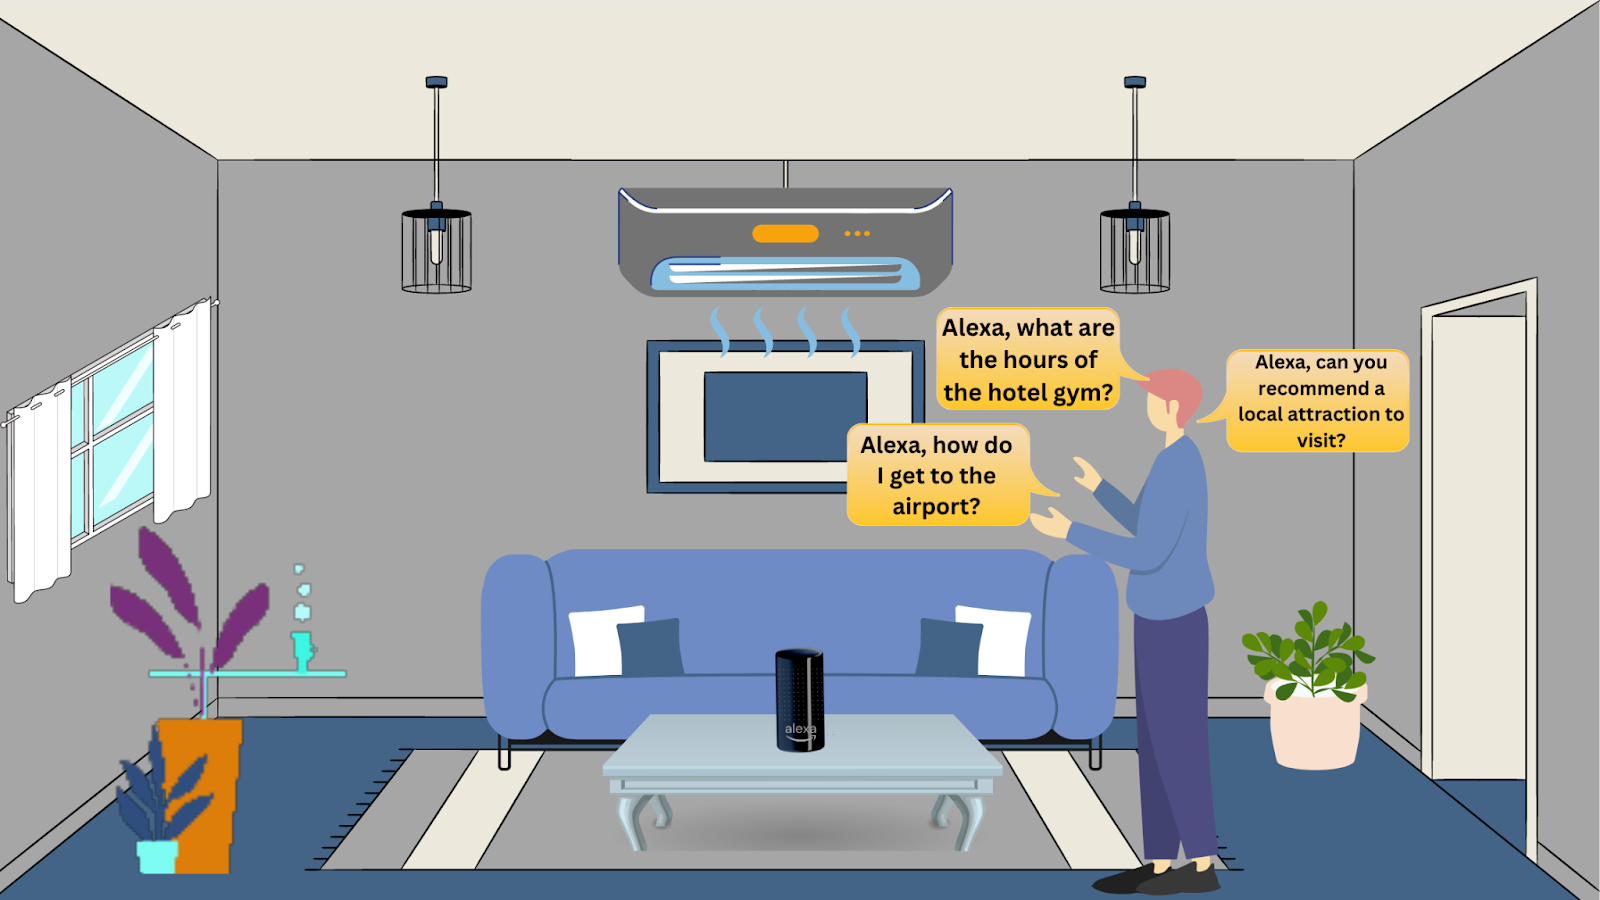 Image of a person using an Alexa device in a hotel room